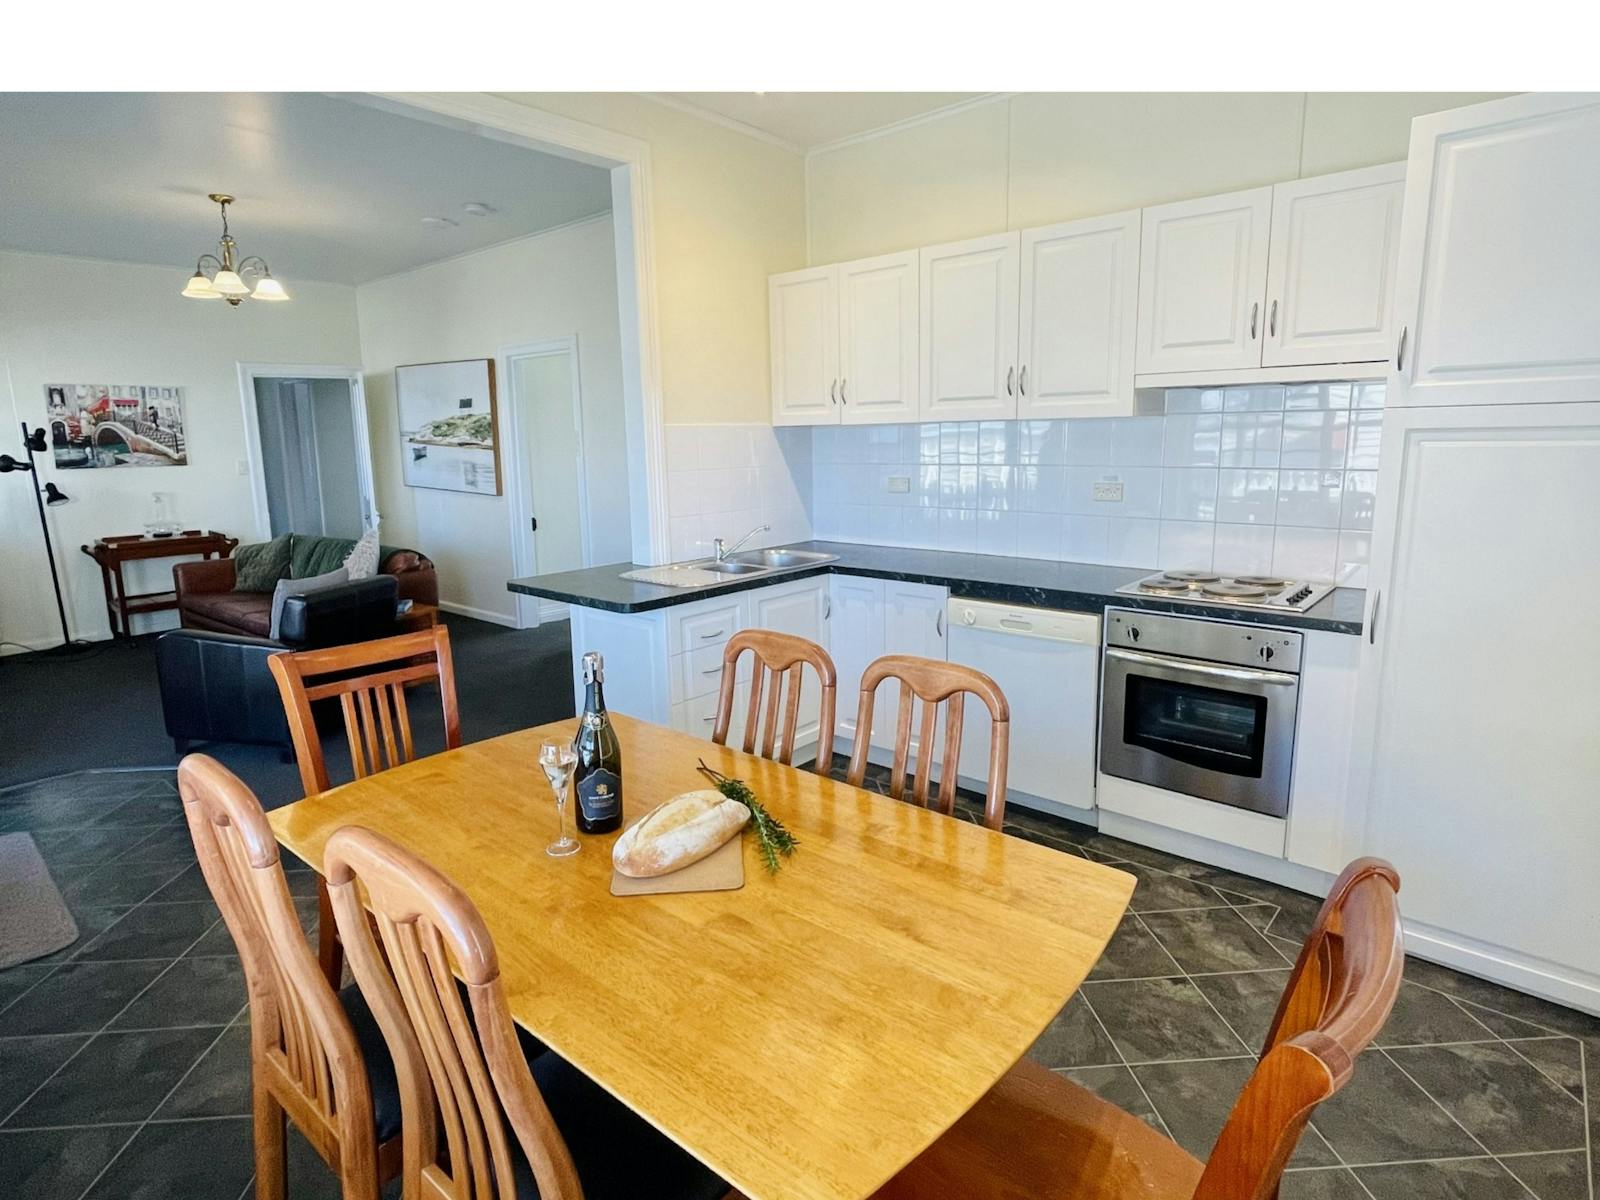 well stocked kitchen, seating for 6, open plan living area, opens onto the deck, views to the beach